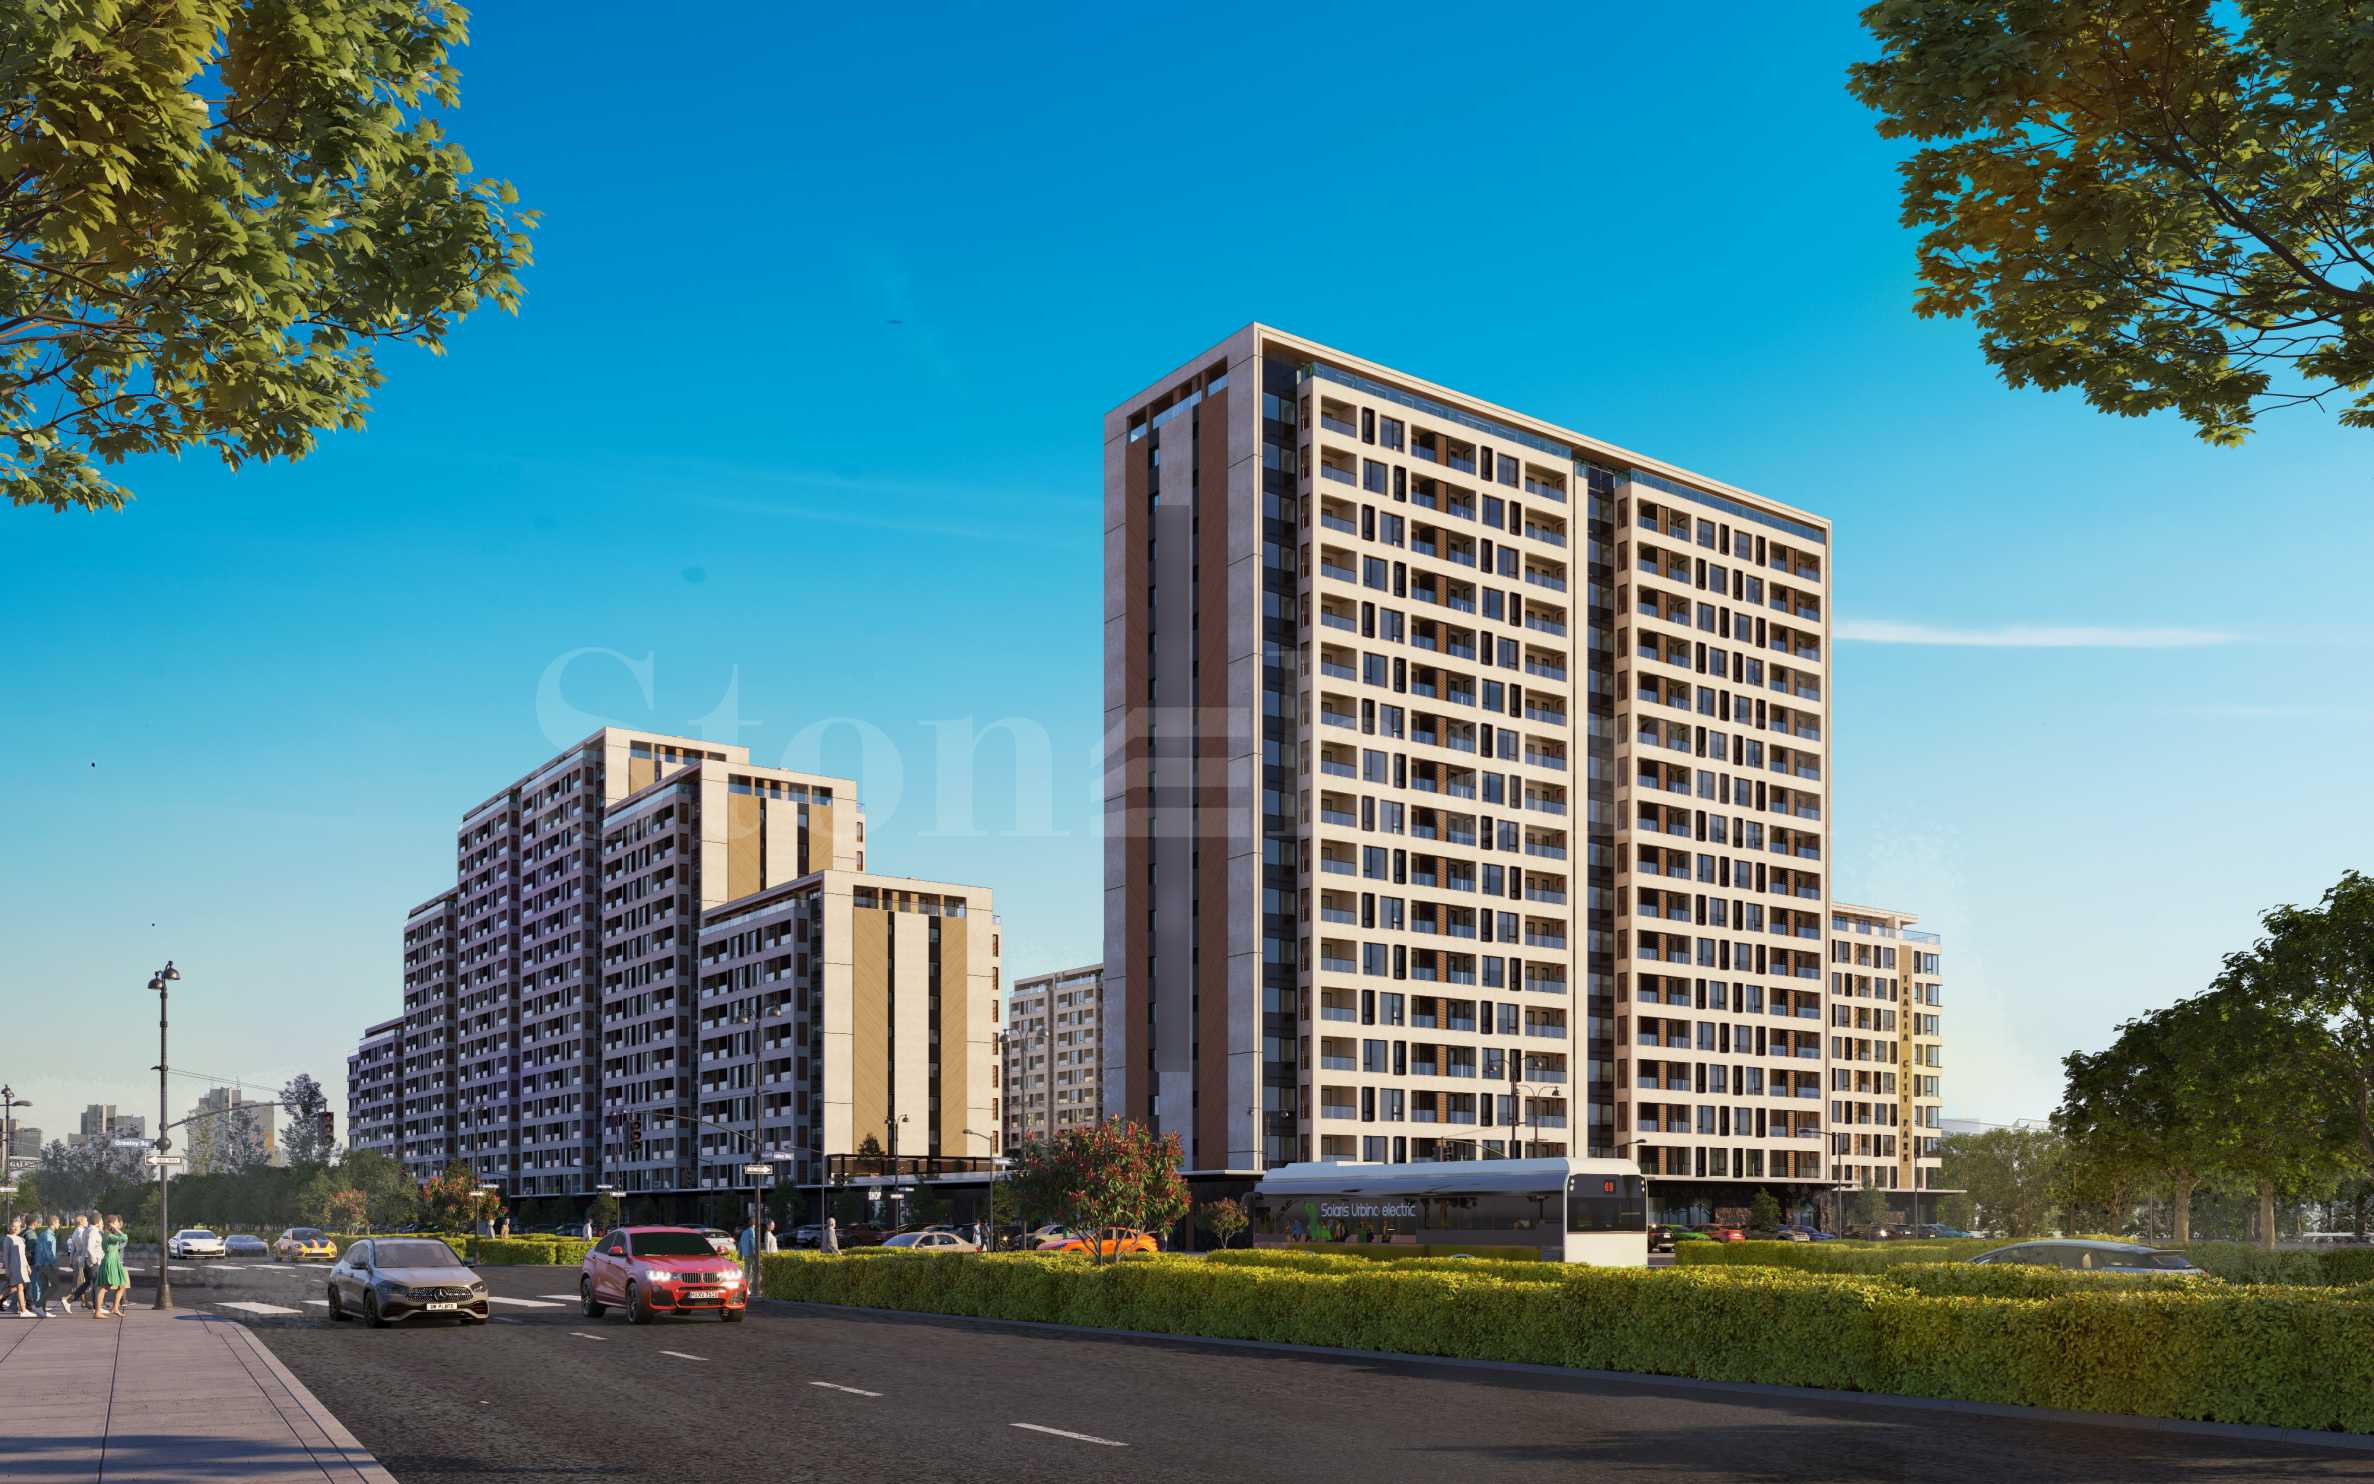 A new residential complex 2 minutes from Lauta Park in Plovdiv1 - Stonehard